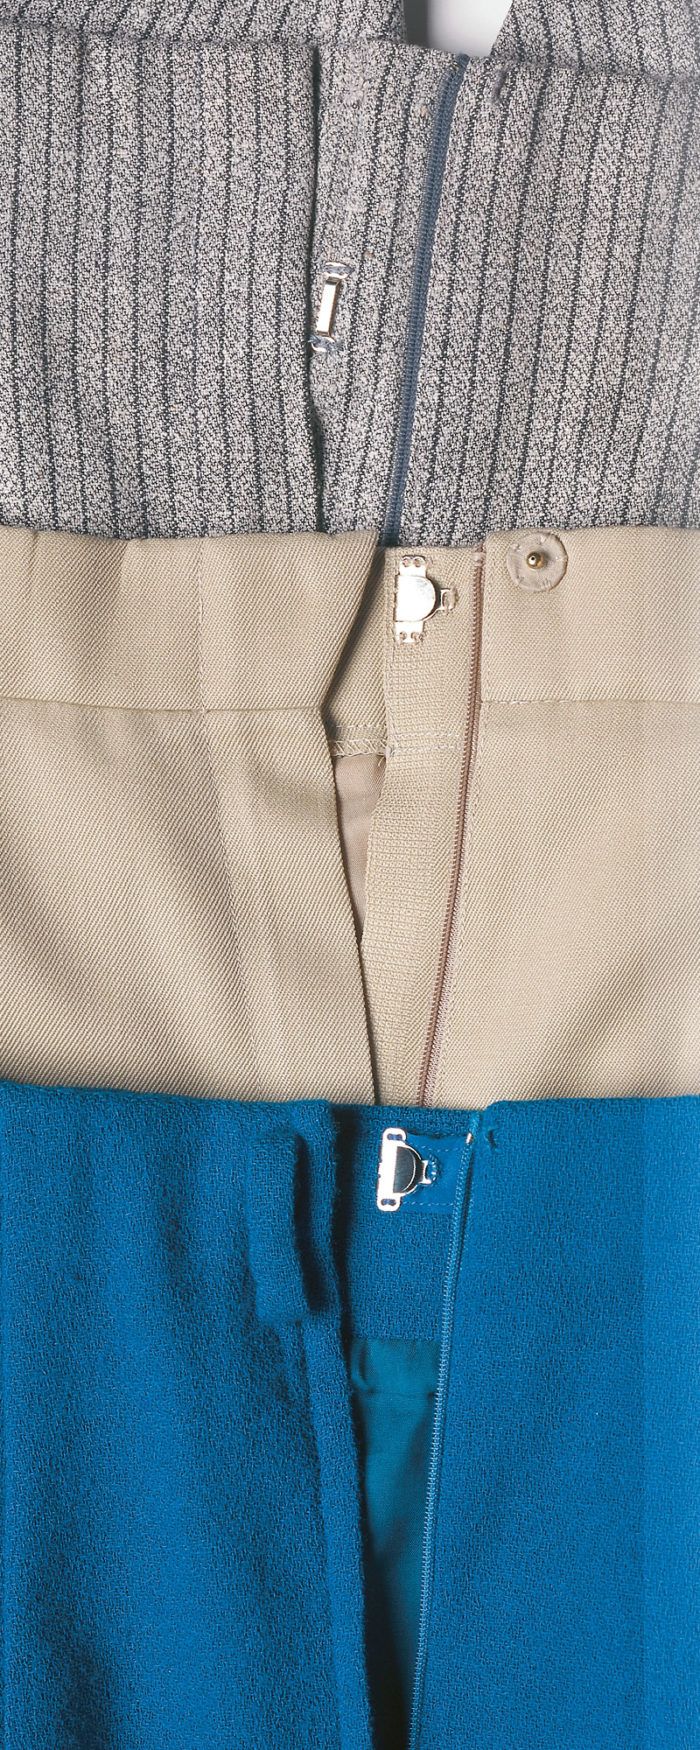 SEWING TUTORIAL: HOW TO SEW A SIDE INVISIBLE ZIPPER AND WAISTBAND 